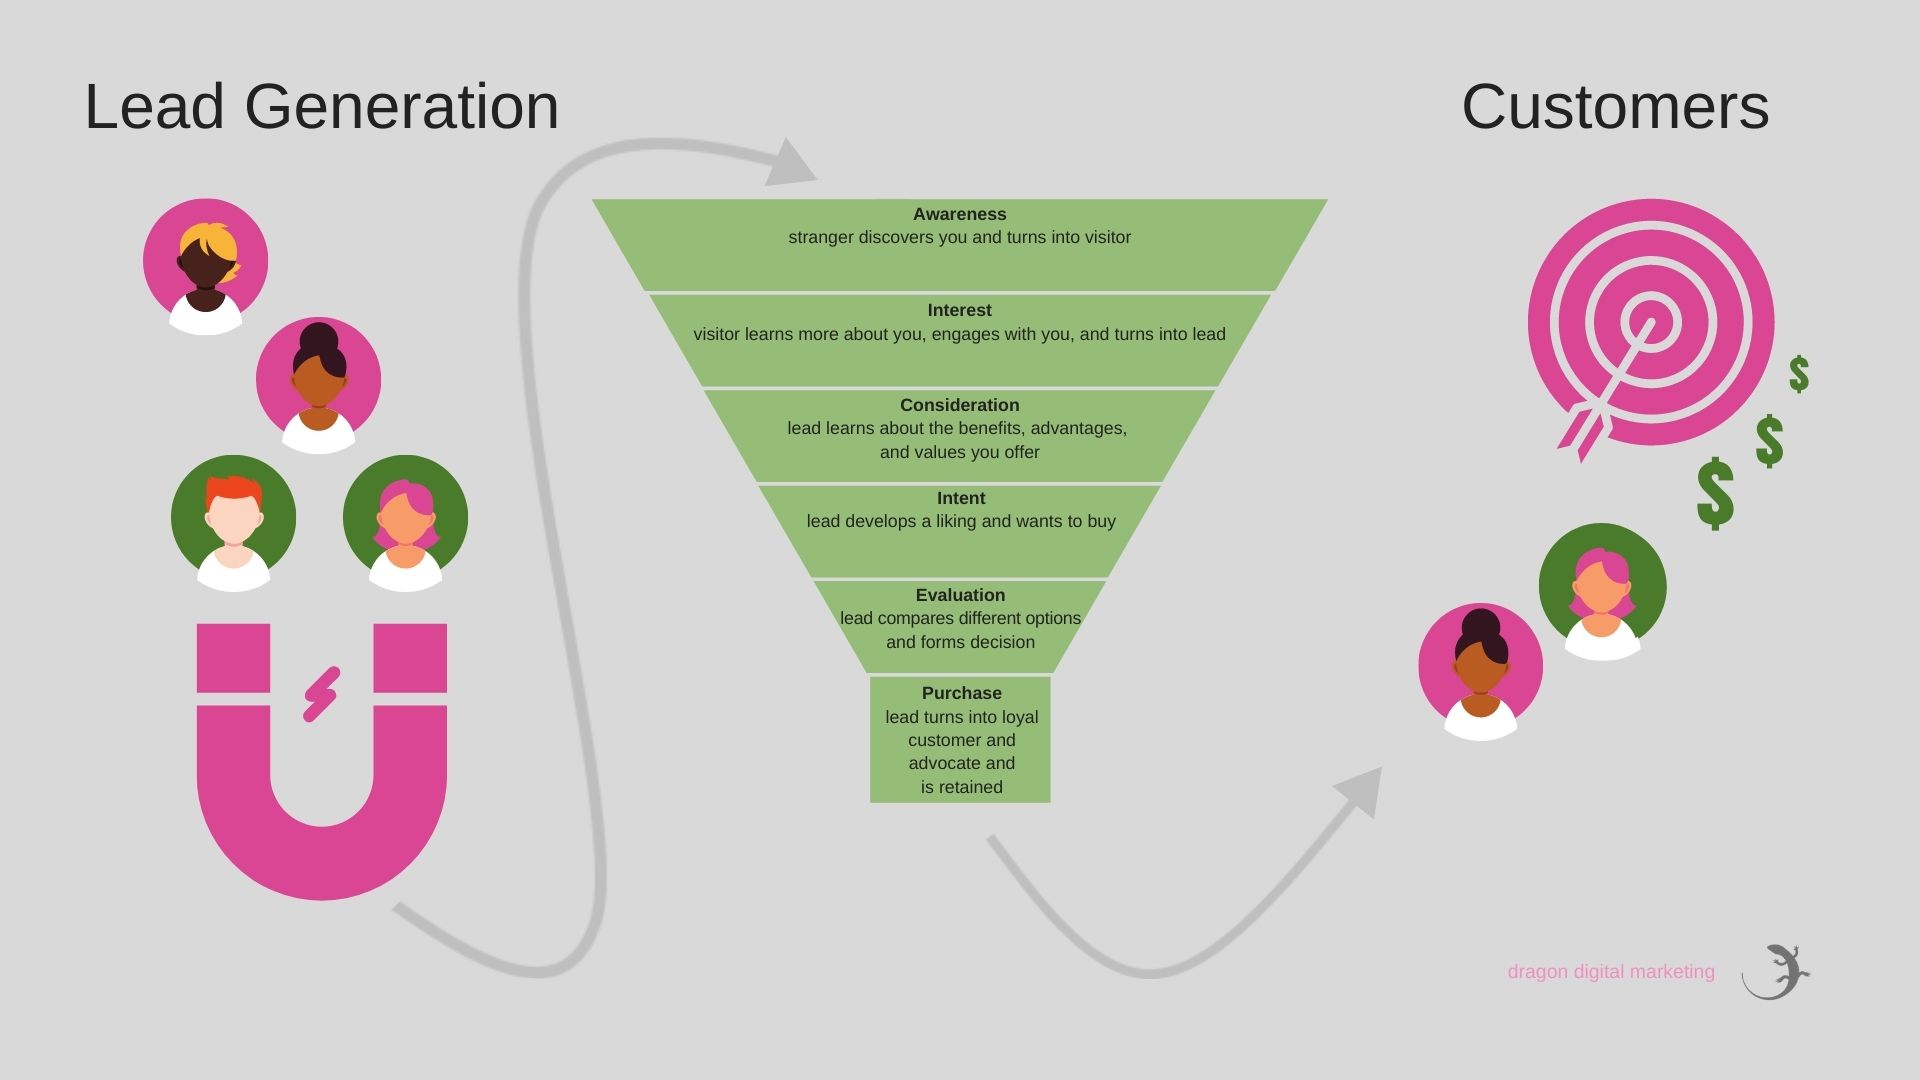 Lead generation with the marketing funnel generating customers